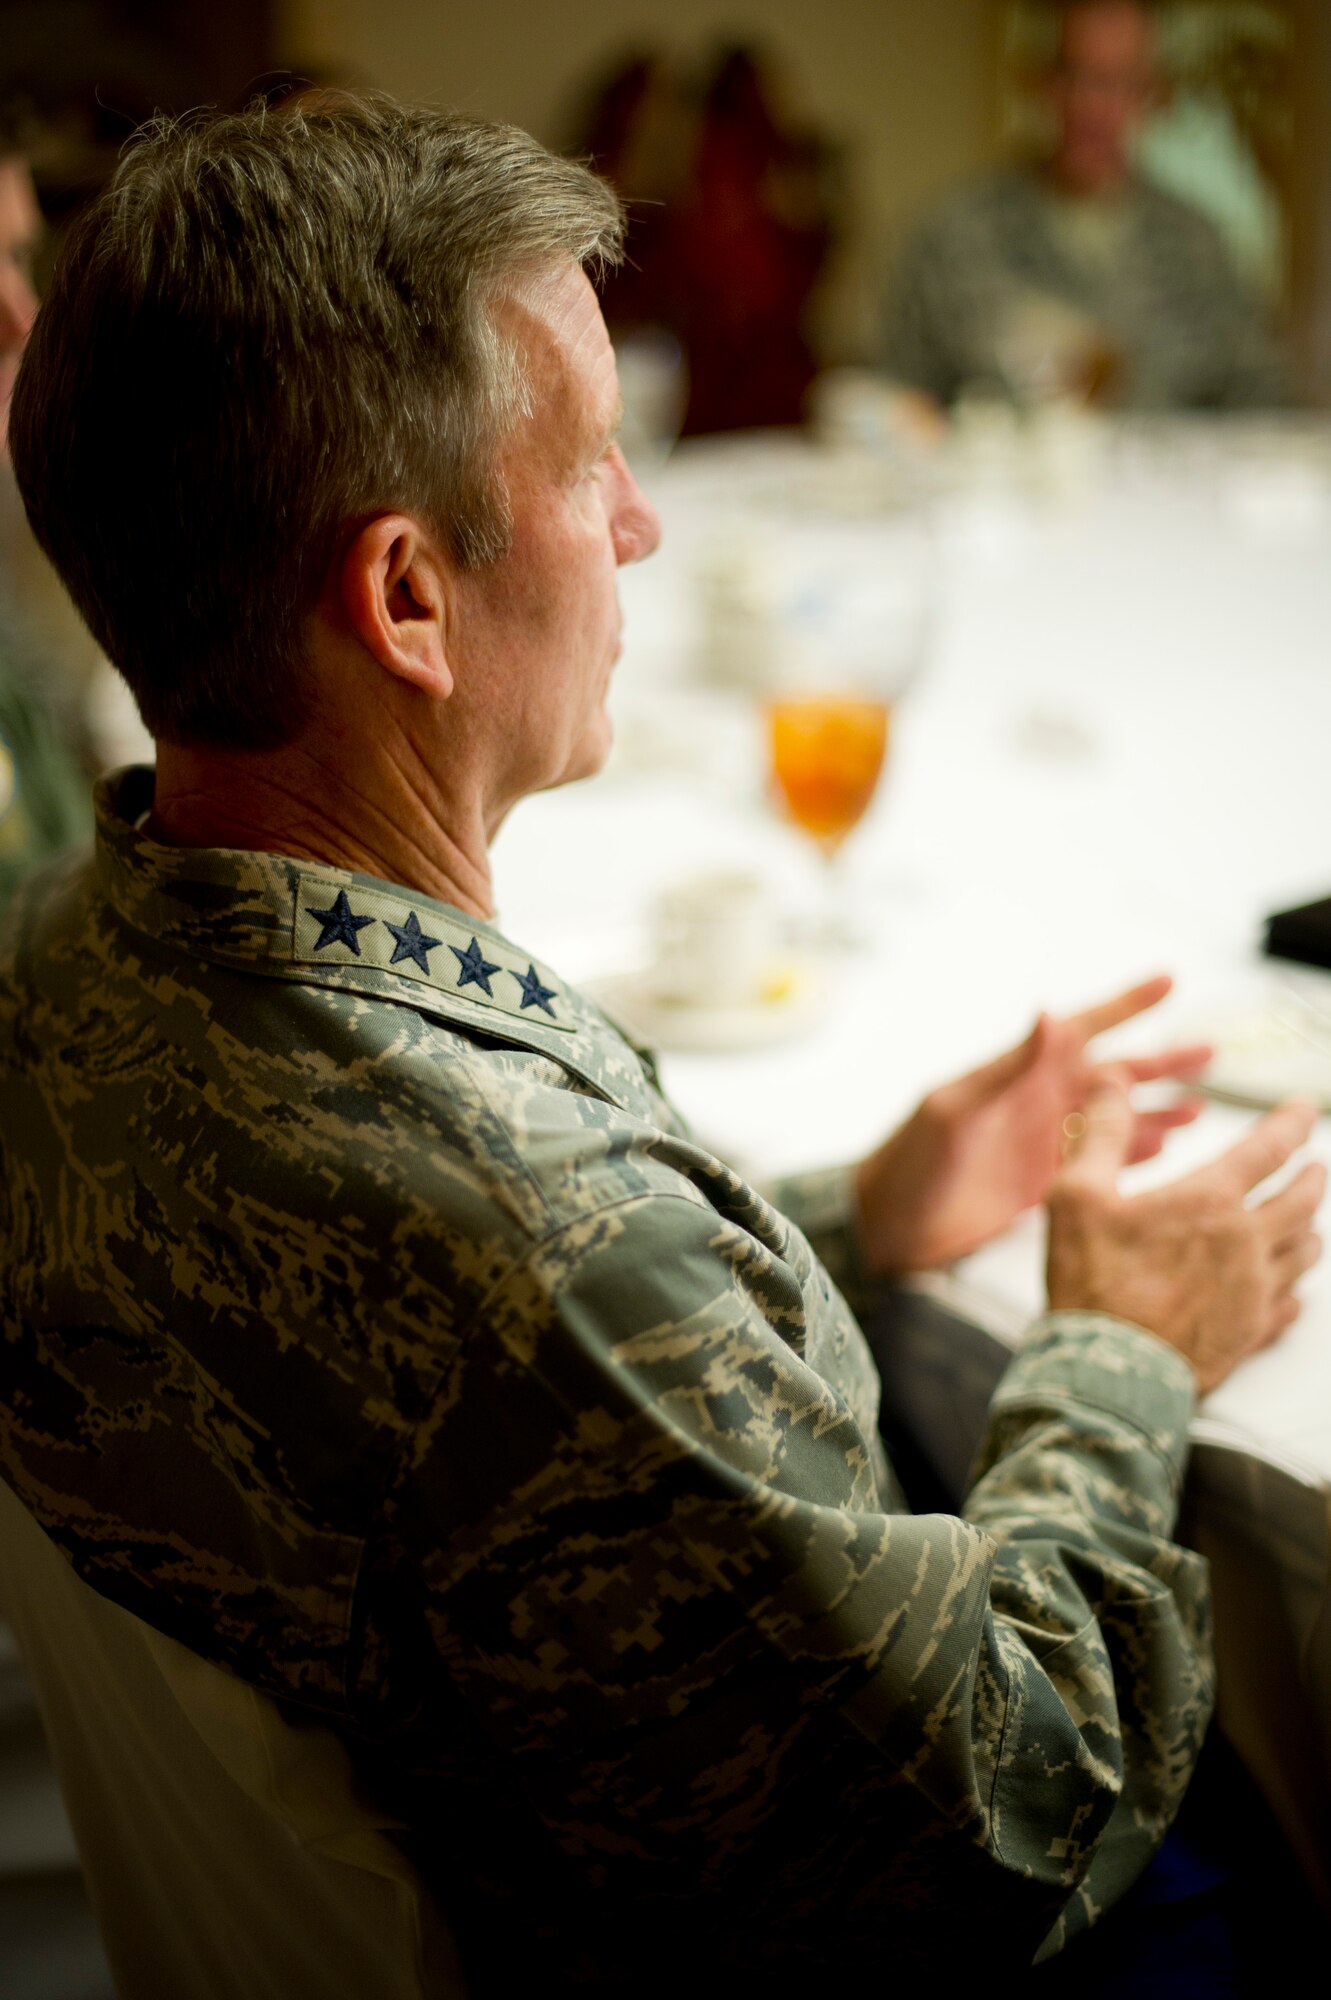 YOKOTA AIR BASE, Japan -- Gen. Herbert J. "Hawk" Carlisle, Pacific Air Forces commander, talks to U.S. Forces, Japan, and 5th Air Force leadership during lunch at Yokota Air Base, Japan, Oct. 23, 2012. This was Carlisle's first visit to Japan as the PACAF commander. (U.S. Air Force photo by Staff Sgt. Stacy Moless)